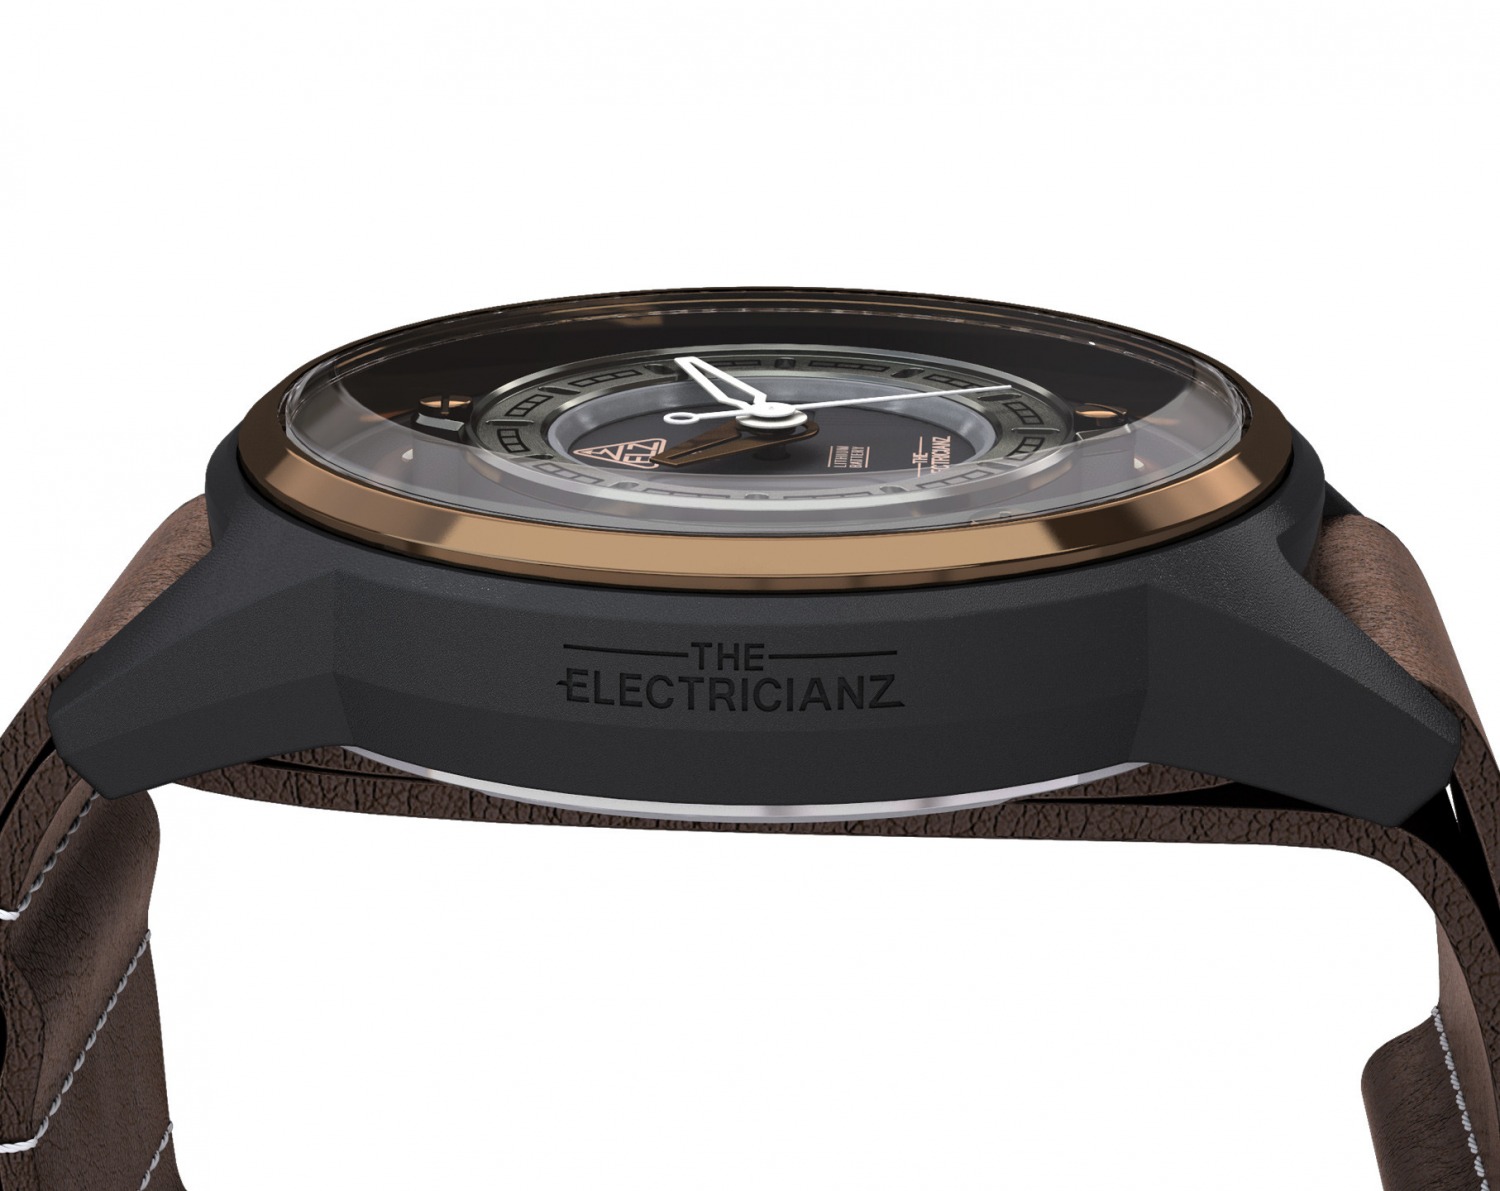 The Electricianz The Mokaz ZZ - A1C / 02 watch, two - tone (bi - colored) dark carbon - grey and polished bronze